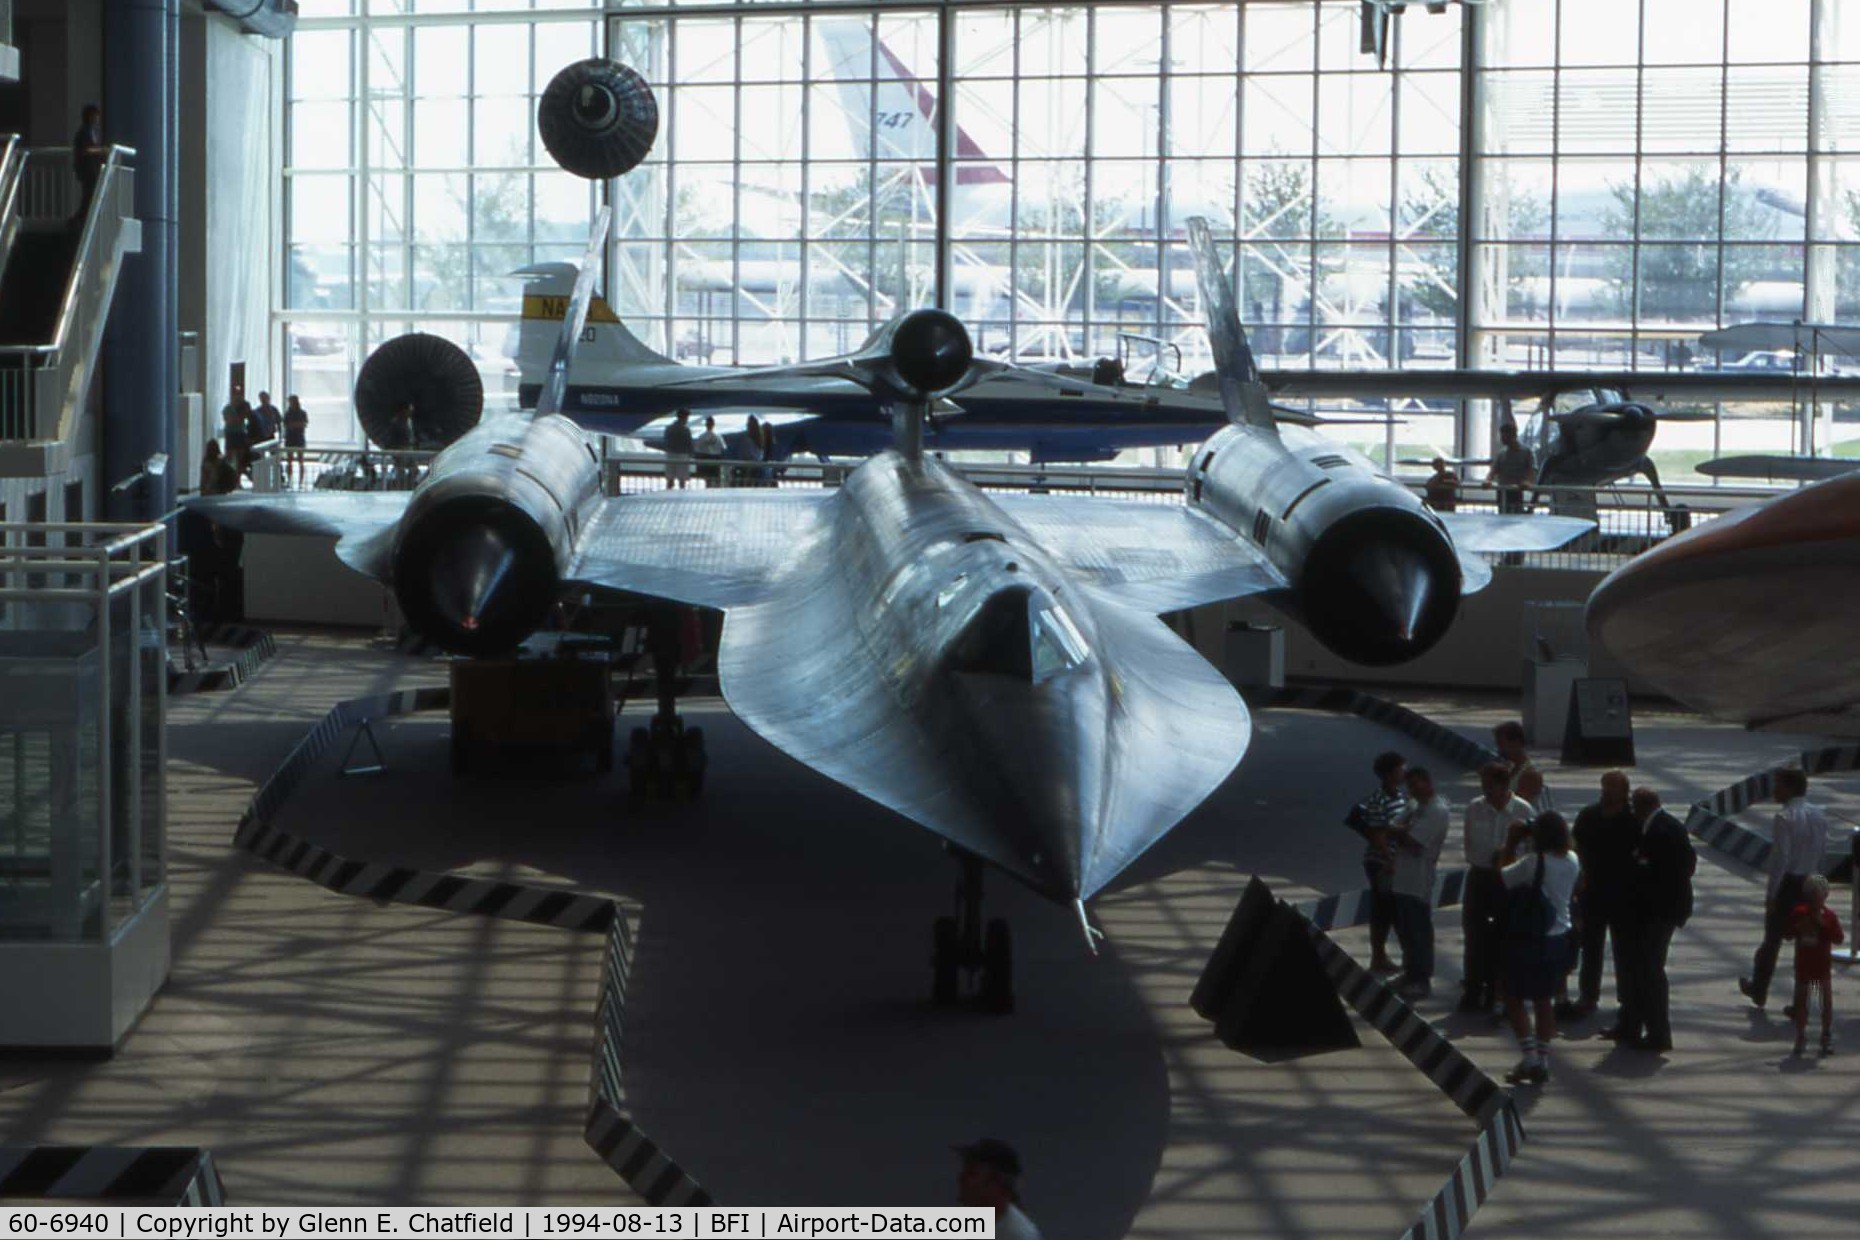 60-6940, 1962 Lockheed A-11 Blackbird C/N 134, A-11 (A-12) at the Boeing Museum of Flight